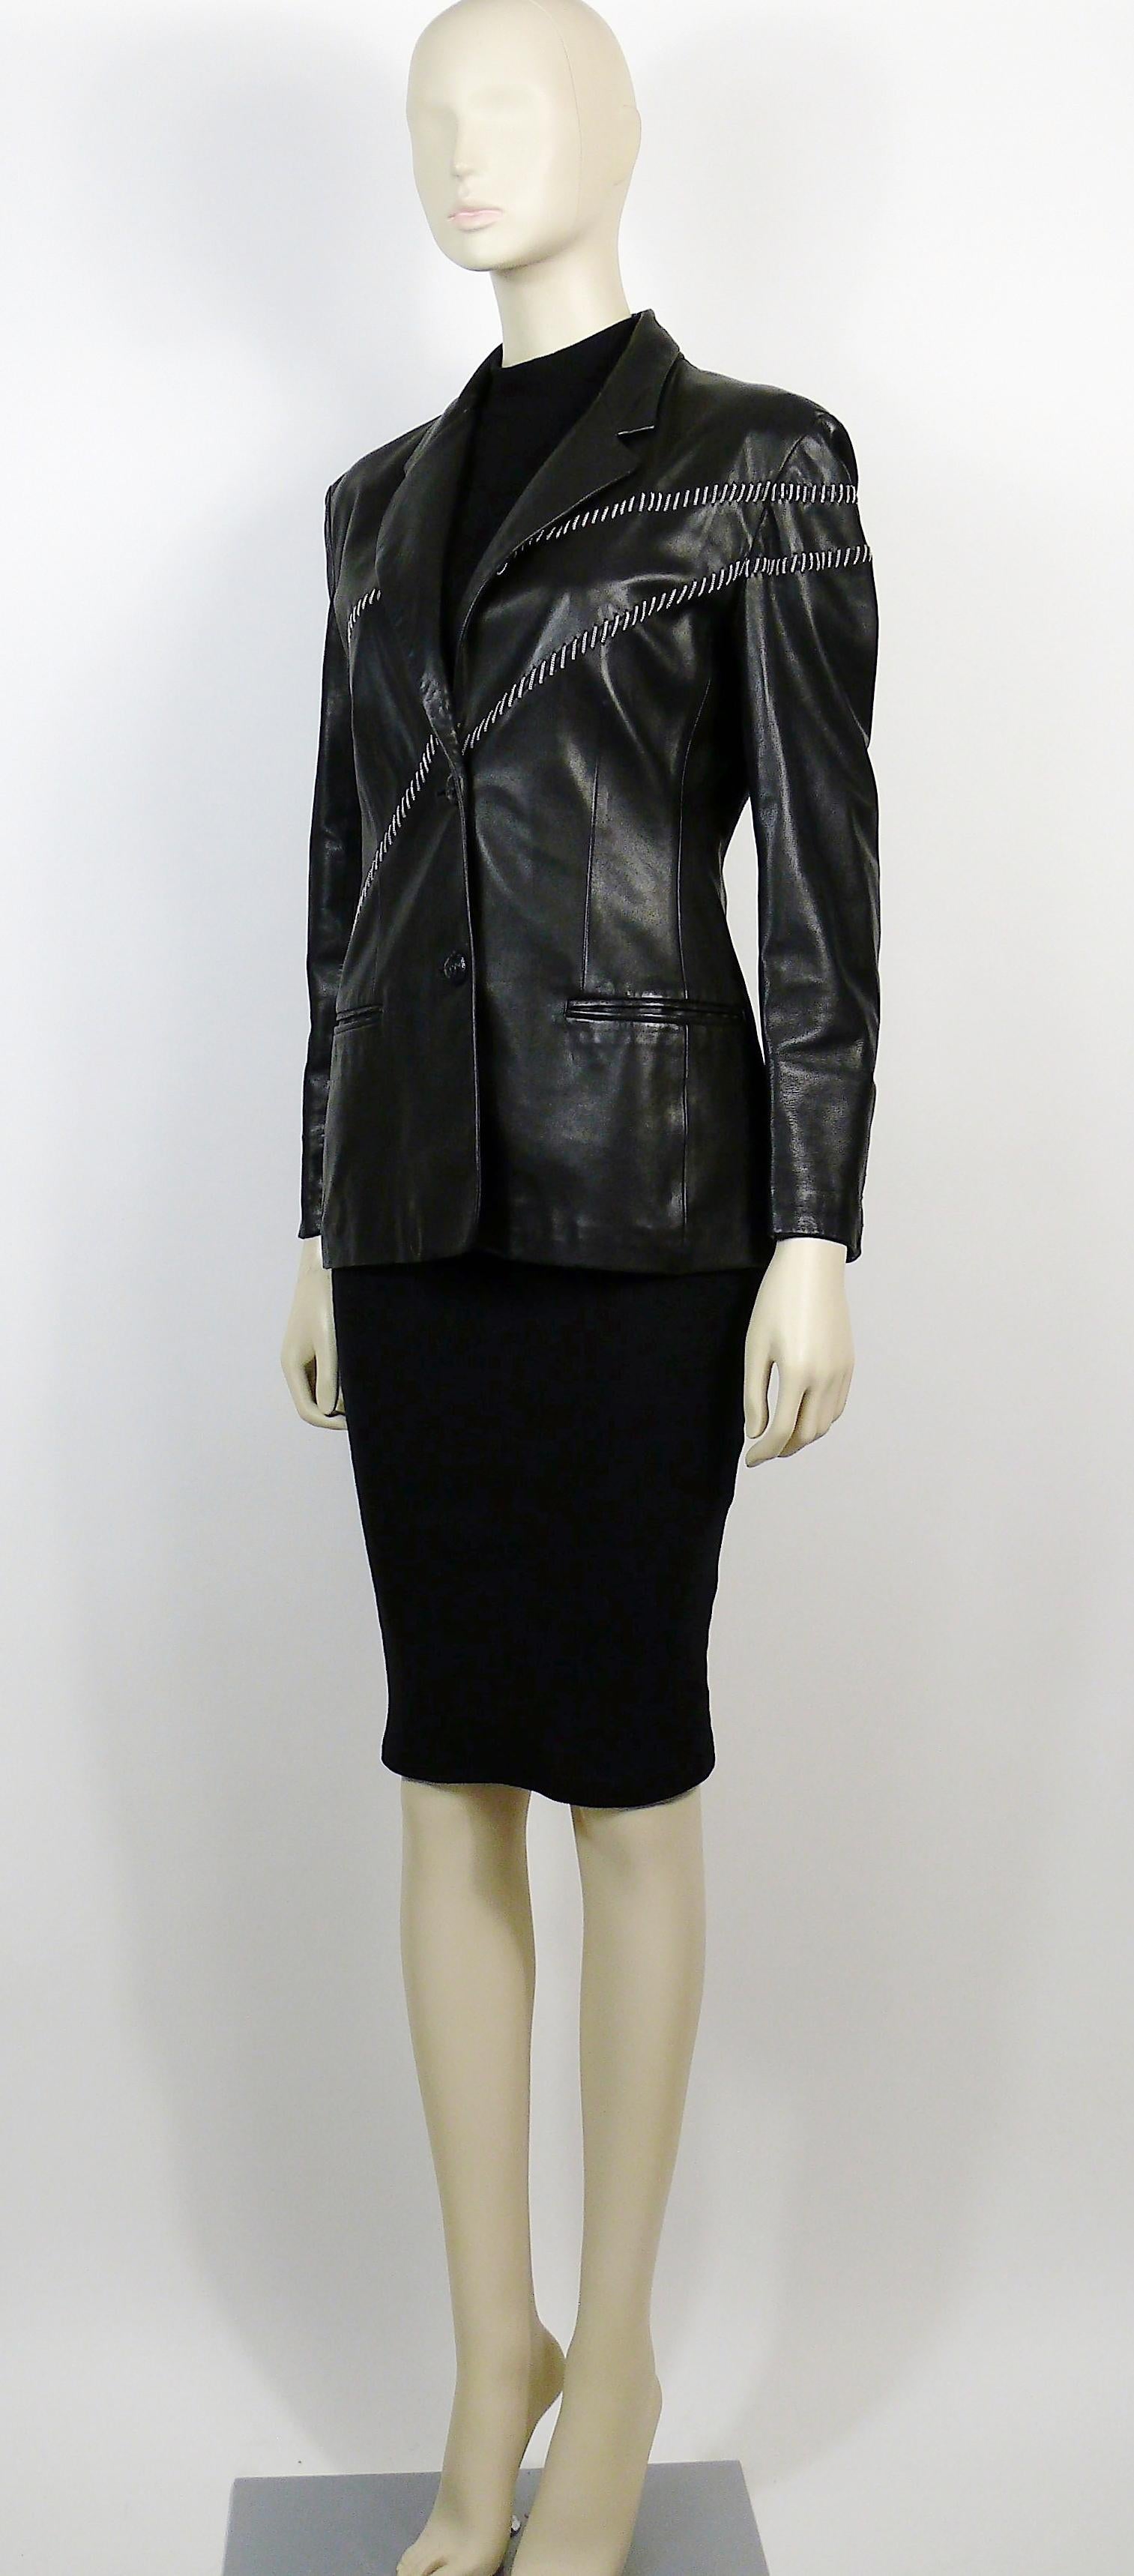 Gianni Versace Vintage Leather Blazer with Chains For Sale 1